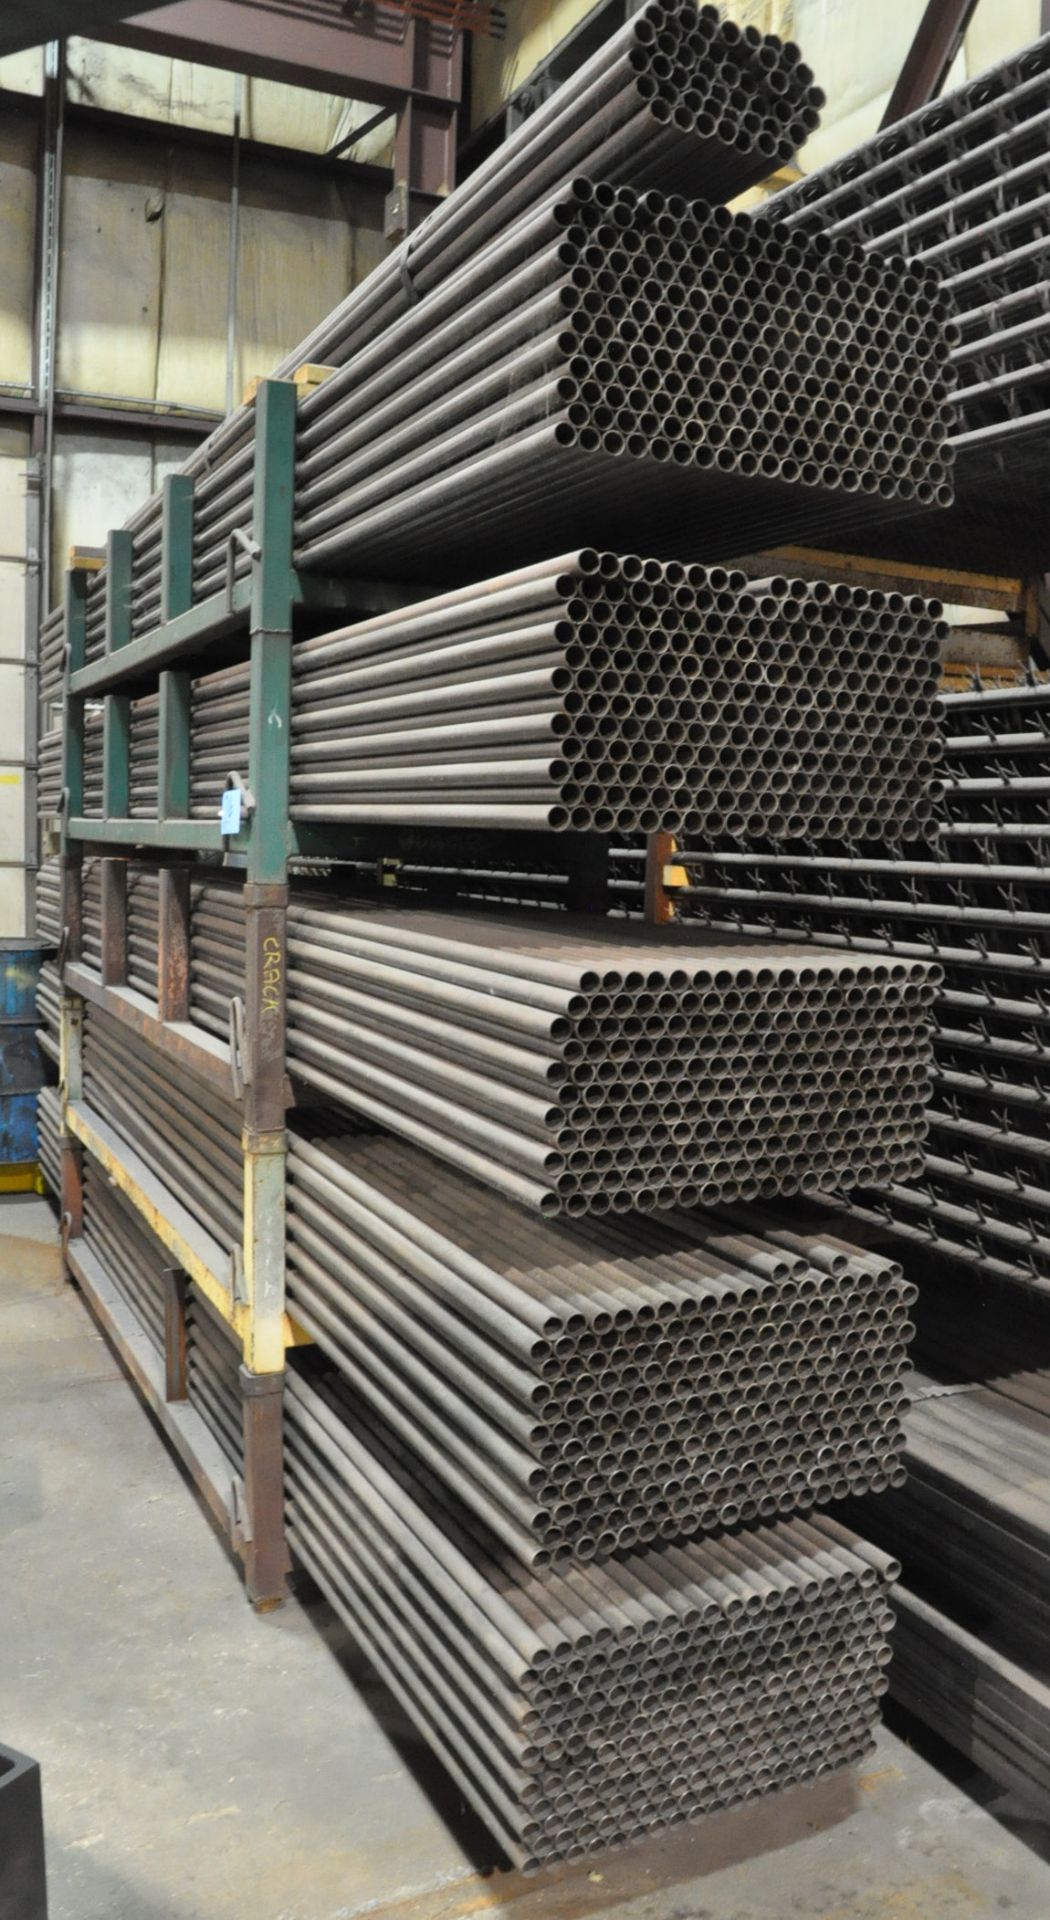 Lot -1163 pcs. 1.250” O.D. x 16 ga. wall x 15’ 7/8” Steel Hollow Tube Stock with (5) Stock Carriers